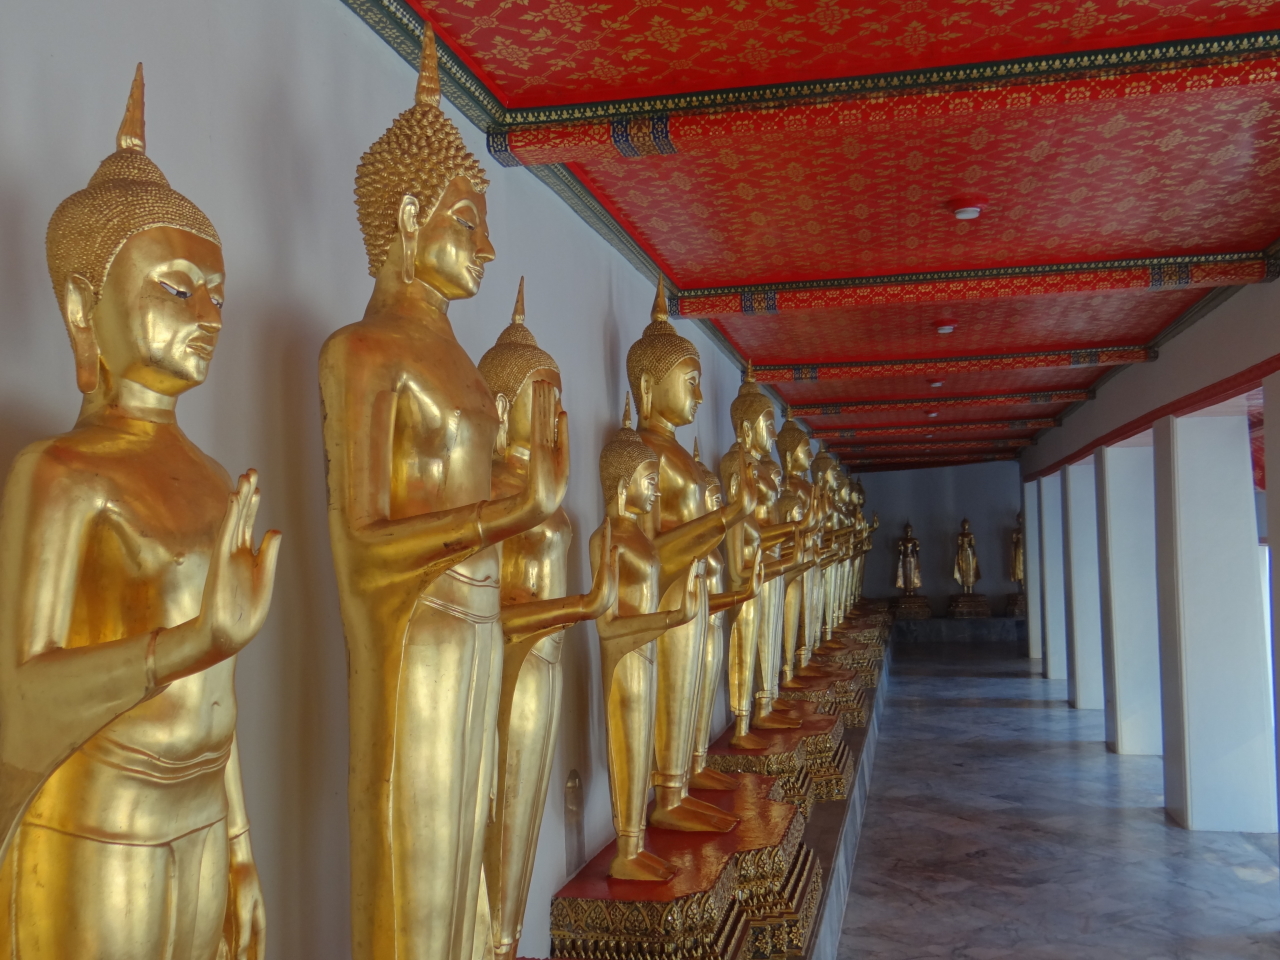 Wat Pho, one of the largest and oldest wats in Bangkok